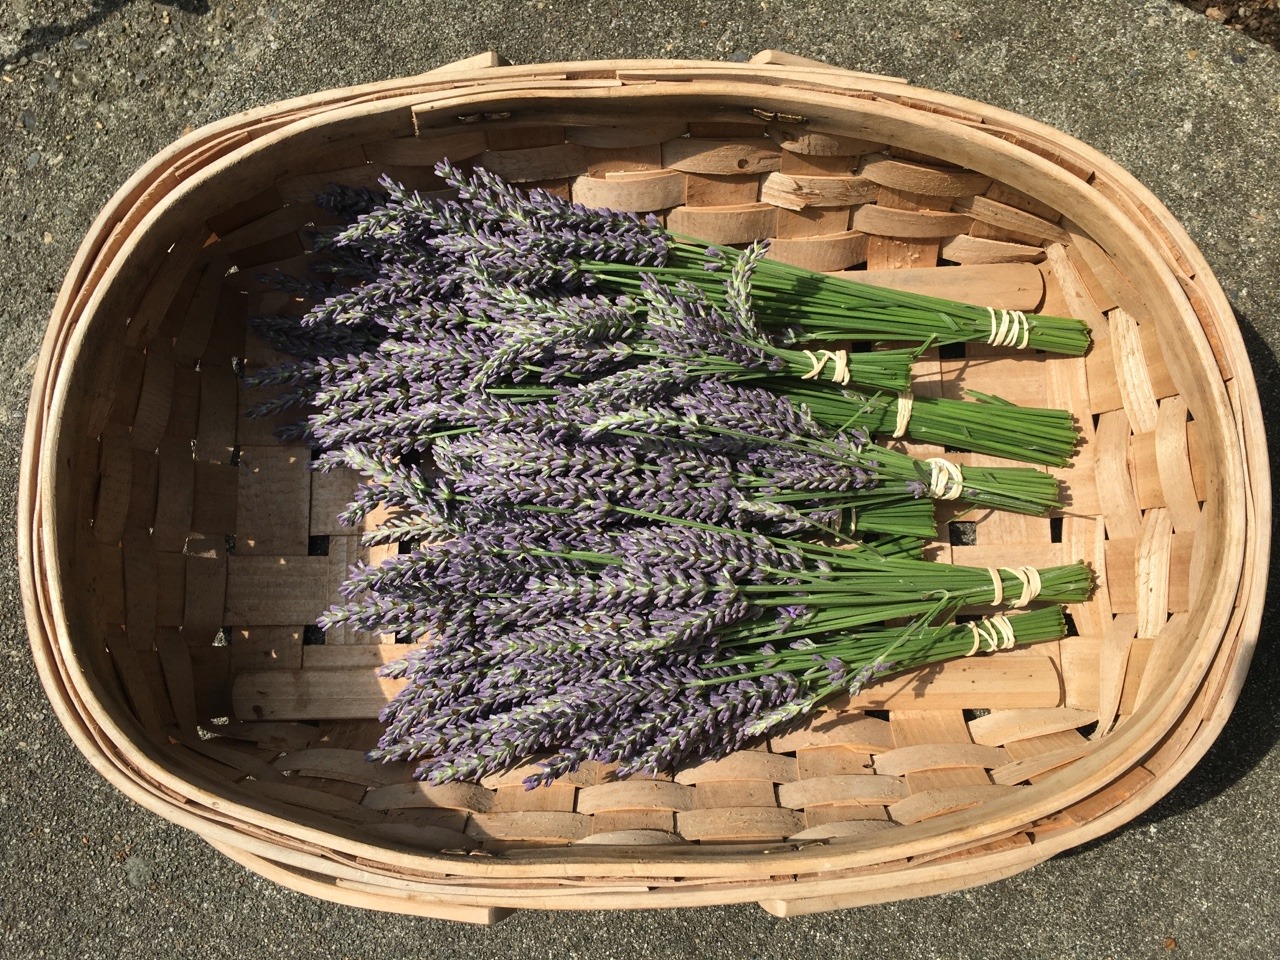 Sex cloud-of-roses:Harvested some lavender and pictures